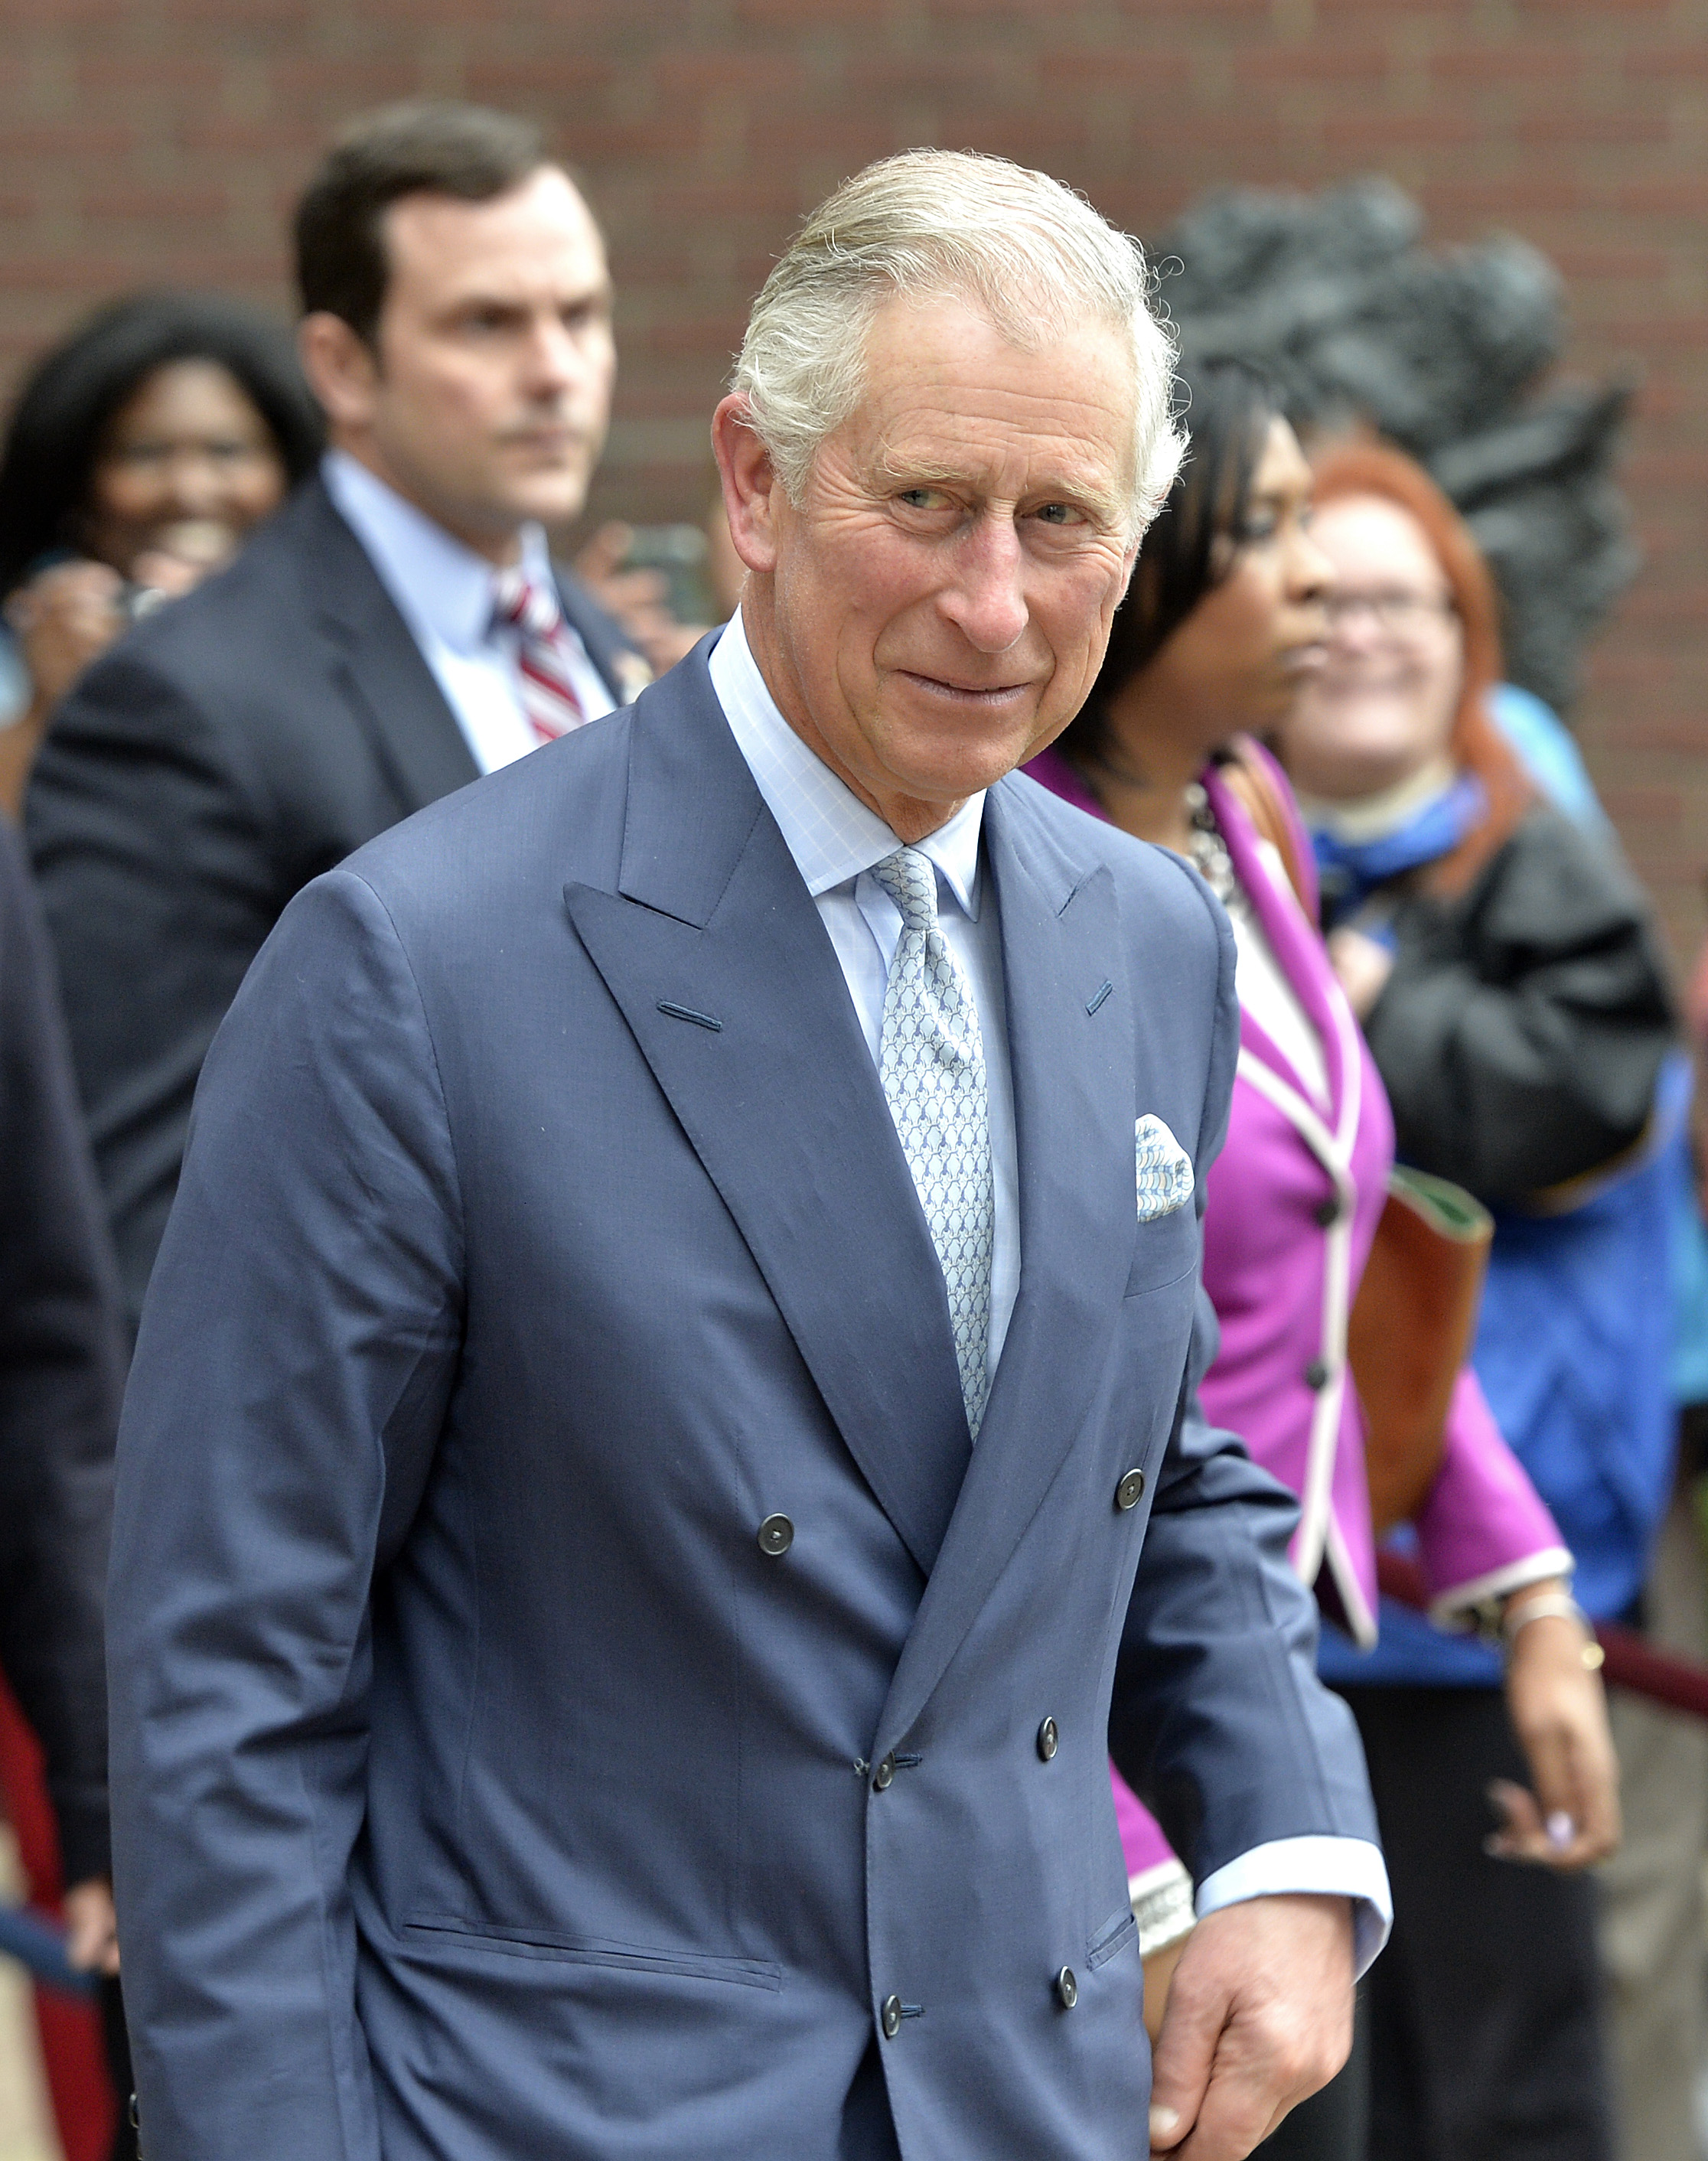 Britain's Prince Charles, left, smiles at the crowd outside of the Cathedral of The Assumption in Louisville, Ky., Friday, March 20, 2015. The Kentucky stop comes after a visit to Washington, D.C. (AP Photo/Timothy D. Easley)